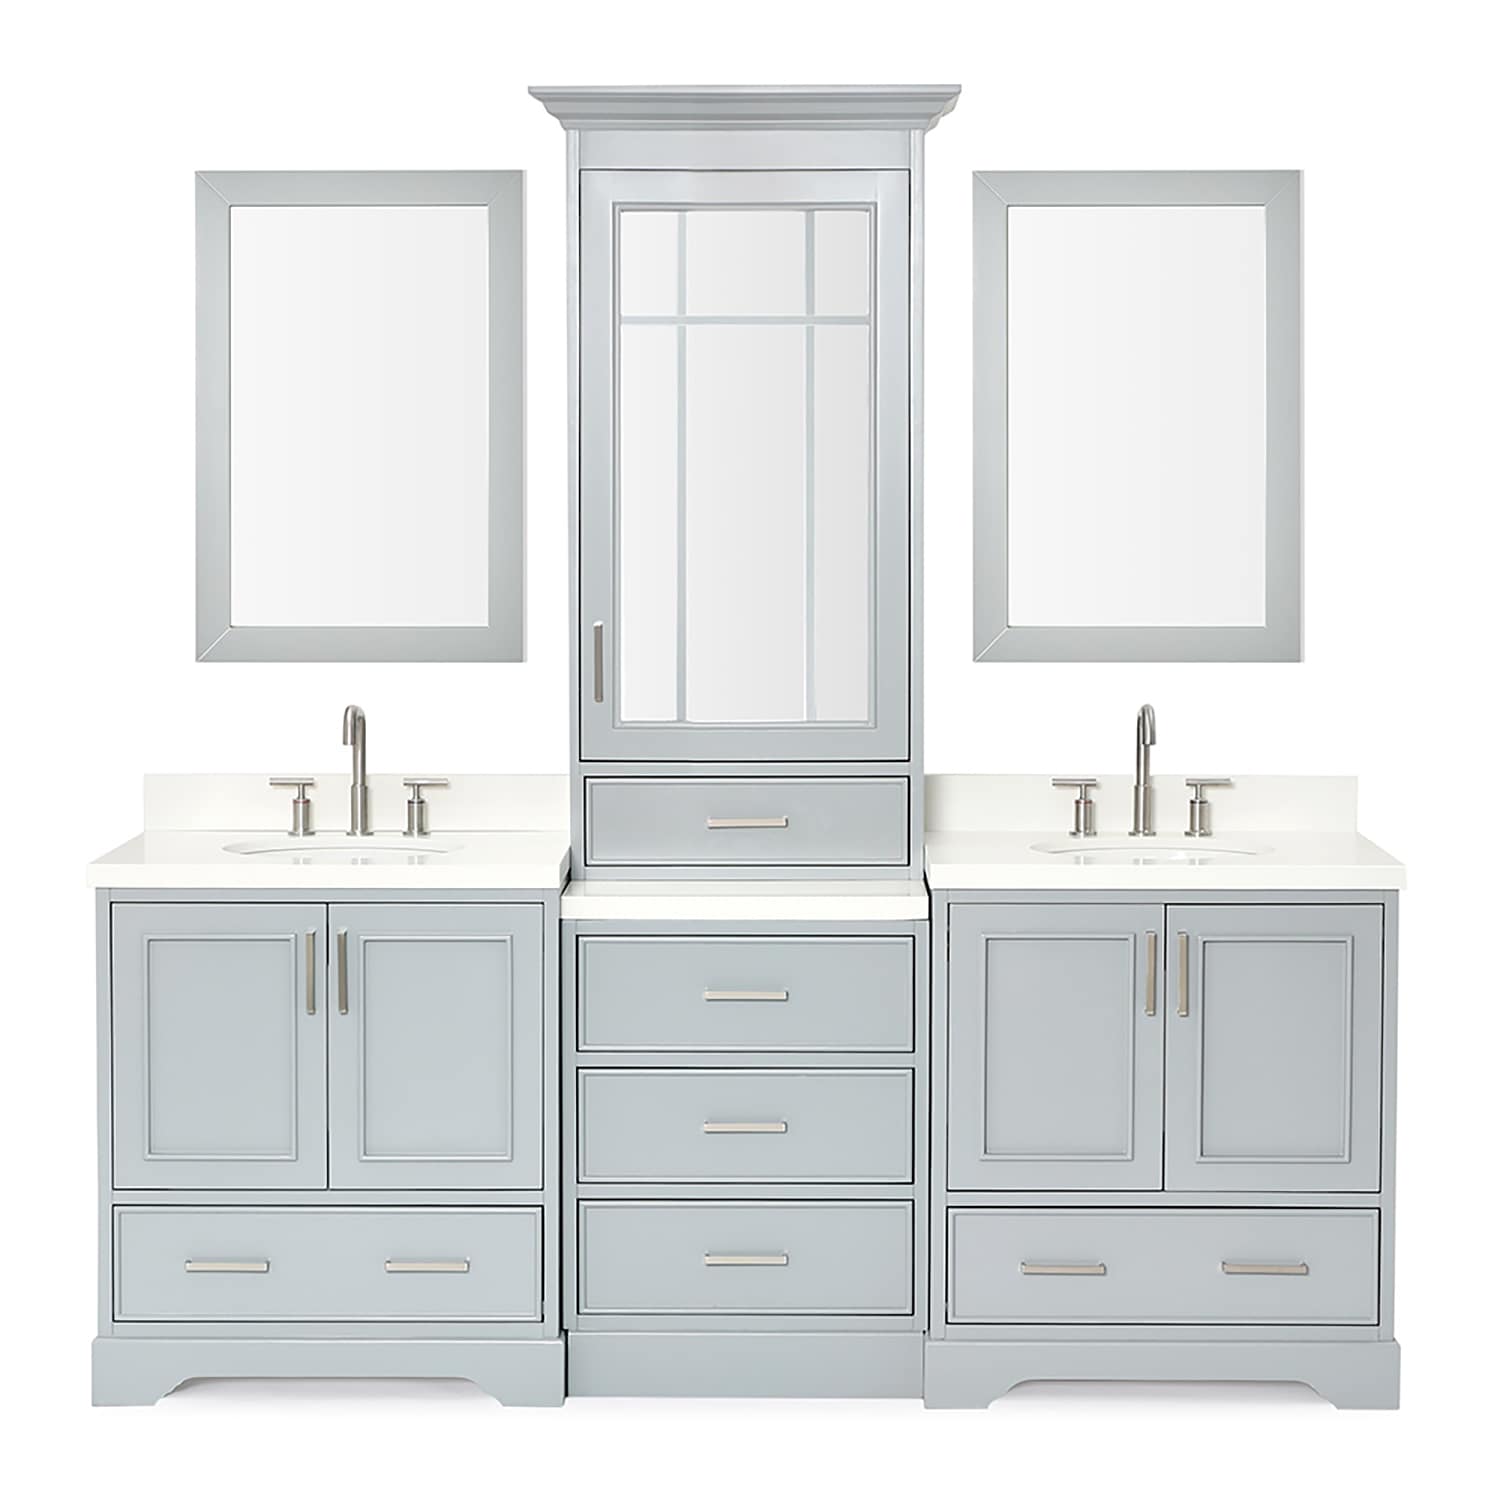 J & D Kitchen Distributors, Inc. - These vanities are separated by an extra  deep tall linen cabinet with tons of extra storage! And I just love the  tile backsplash all the